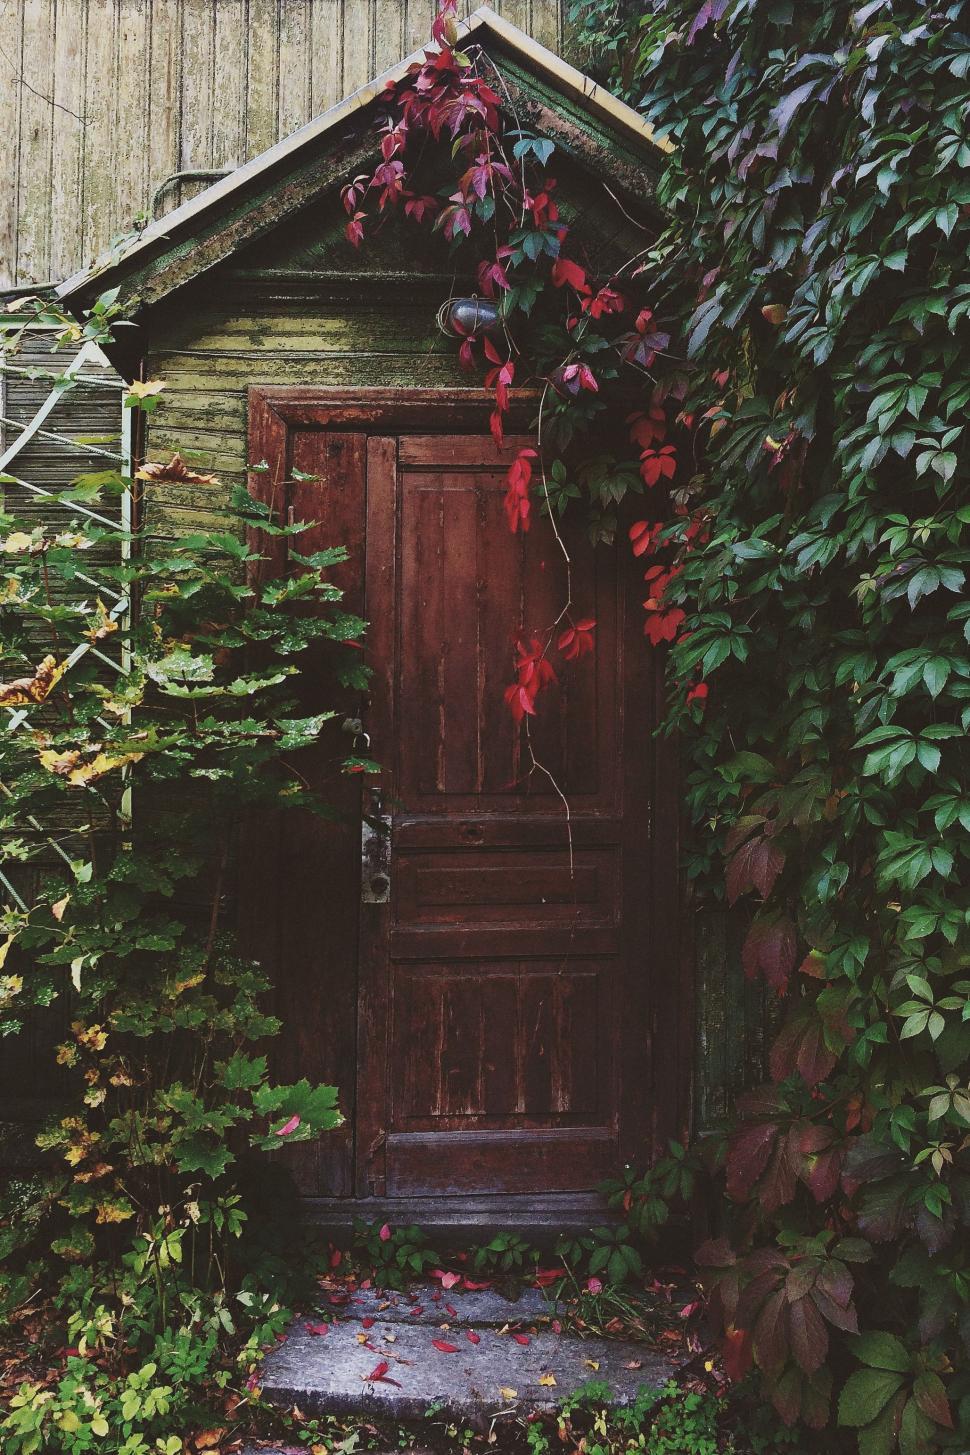 Free Image of Wooden Door Surrounded by Vines and Flowers 